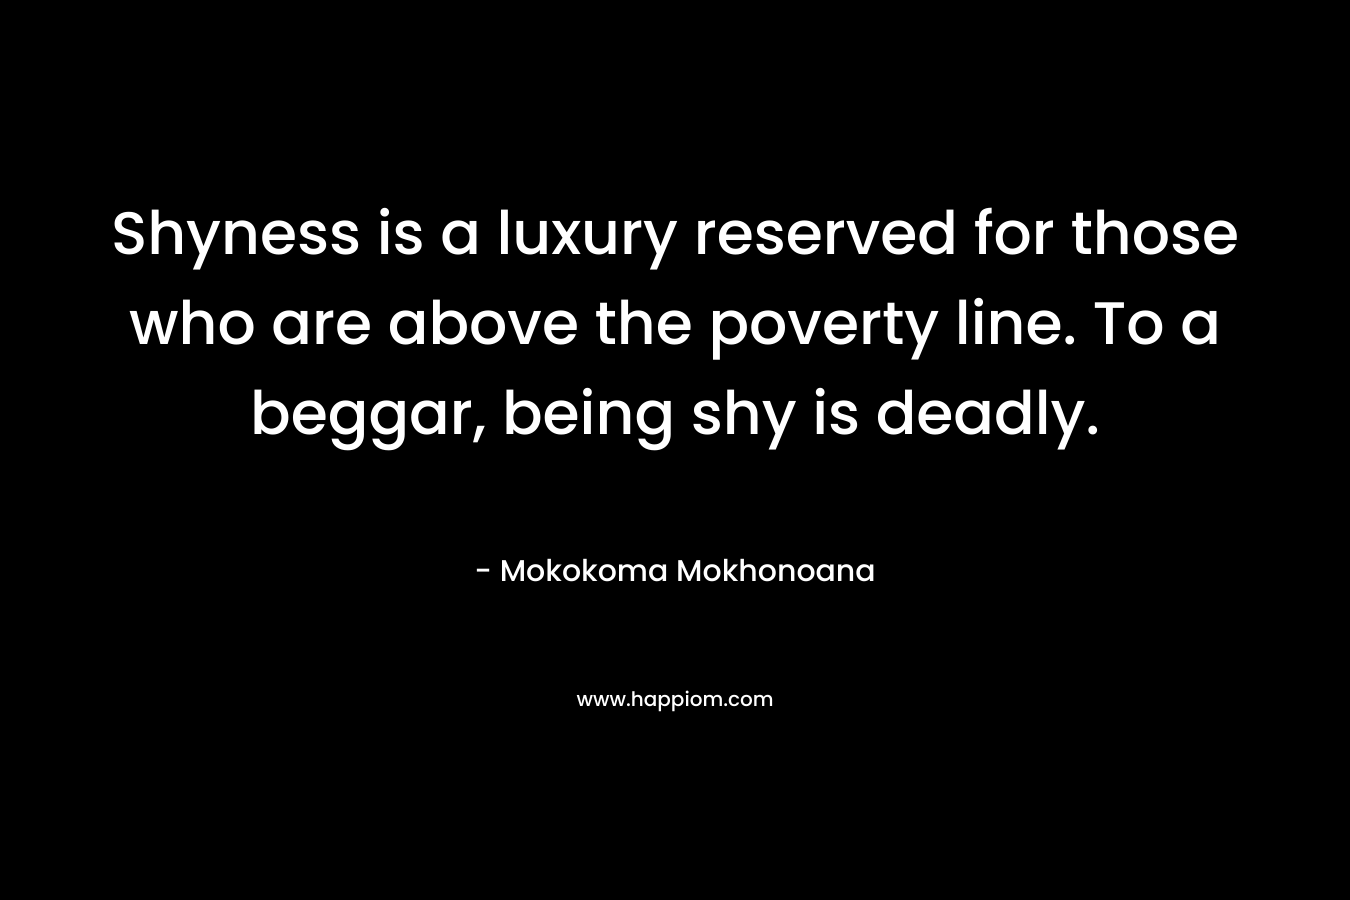 Shyness is a luxury reserved for those who are above the poverty line. To a beggar, being shy is deadly.